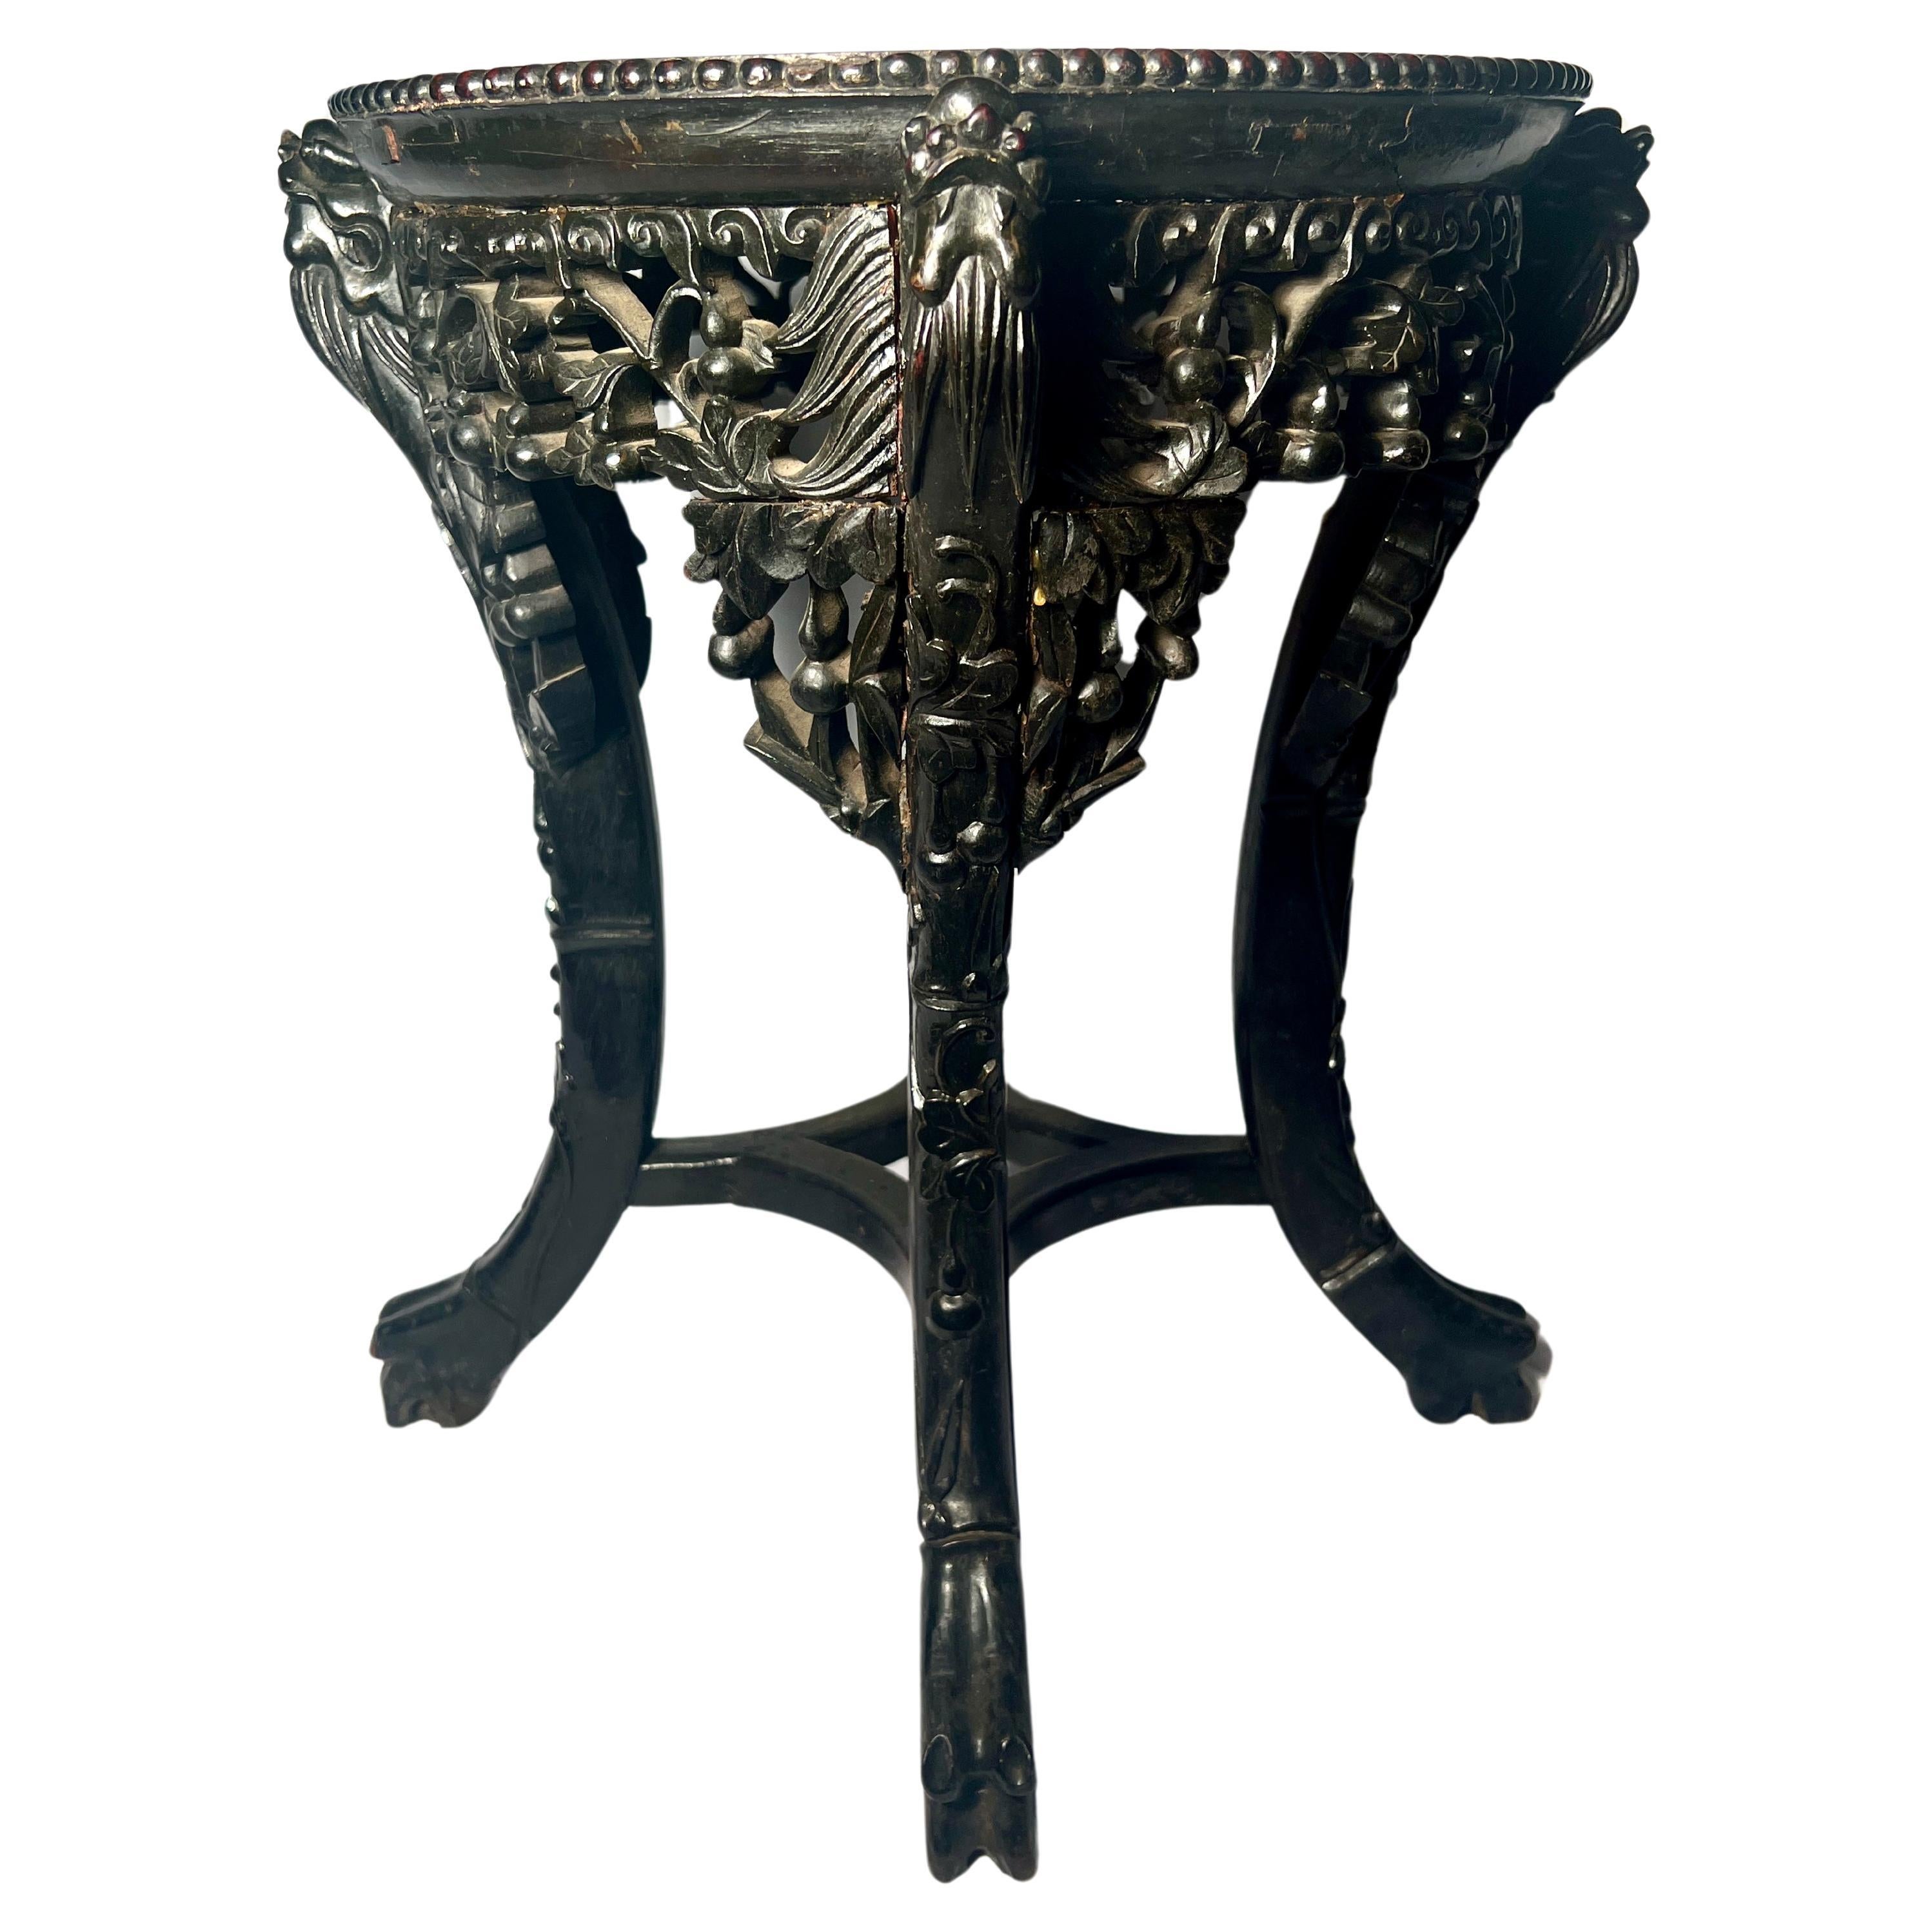 Antique Oriental Carved Teak Wood Marble Top Stand. Over one hundred years old.